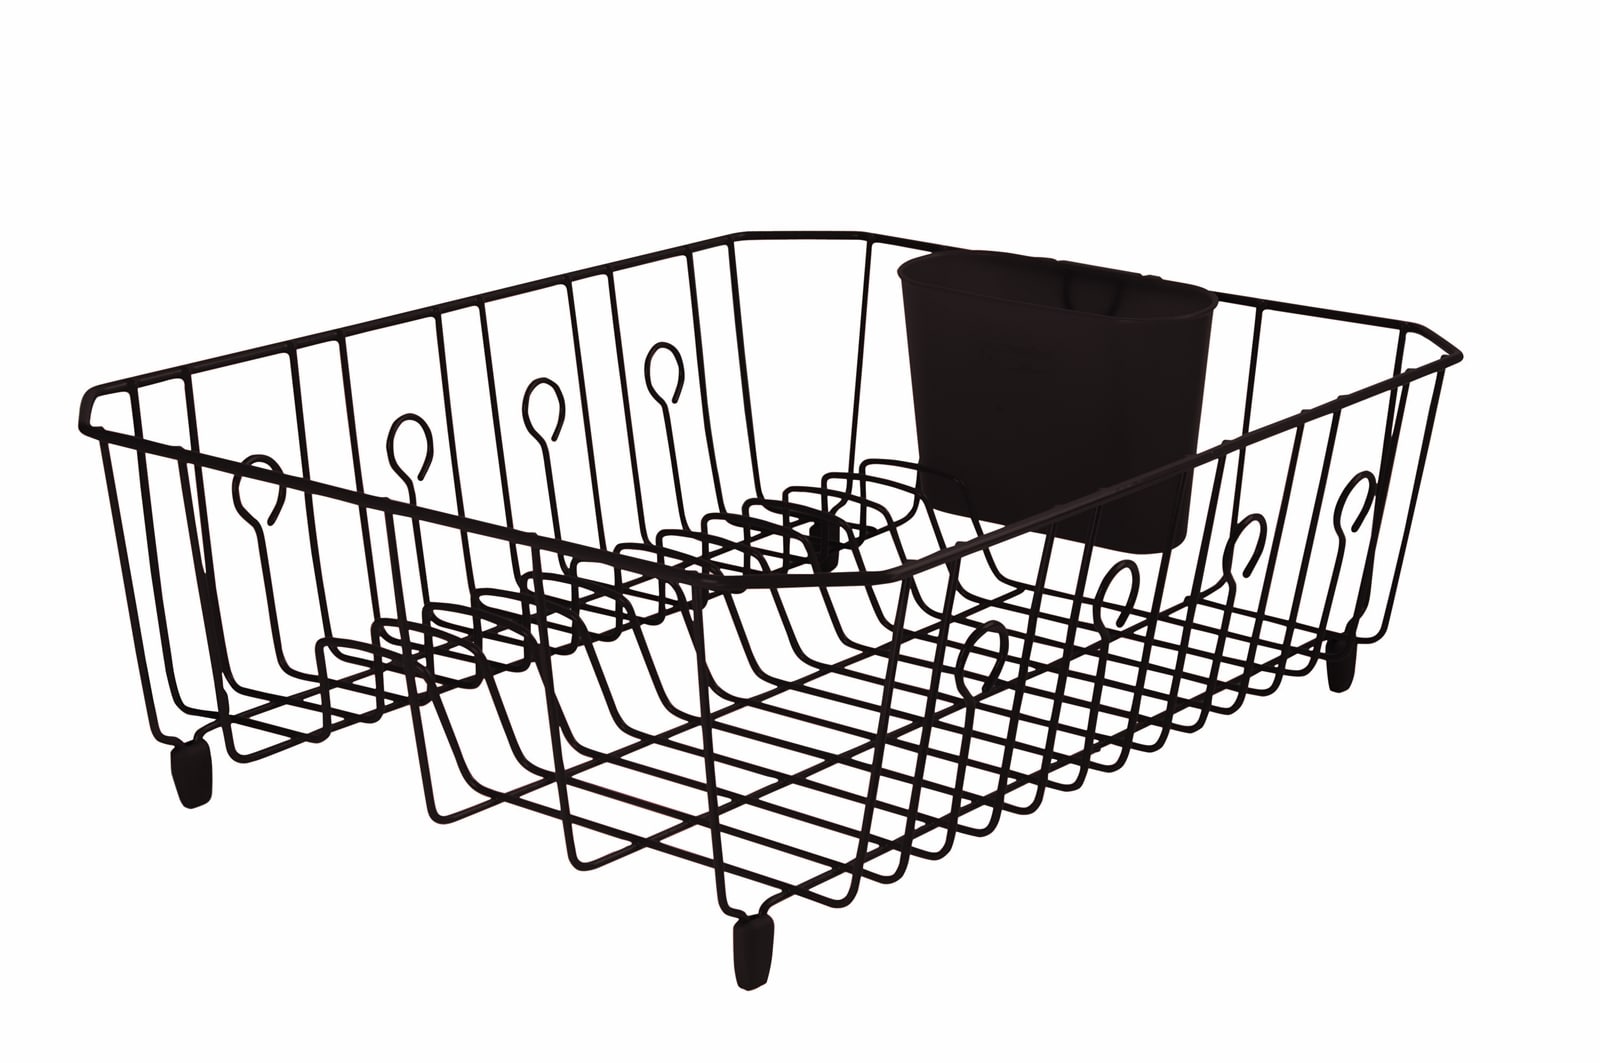 Rubbermaid 13.8-in W x 17.6-in L x 5.93-in H Metal Dish Rack at